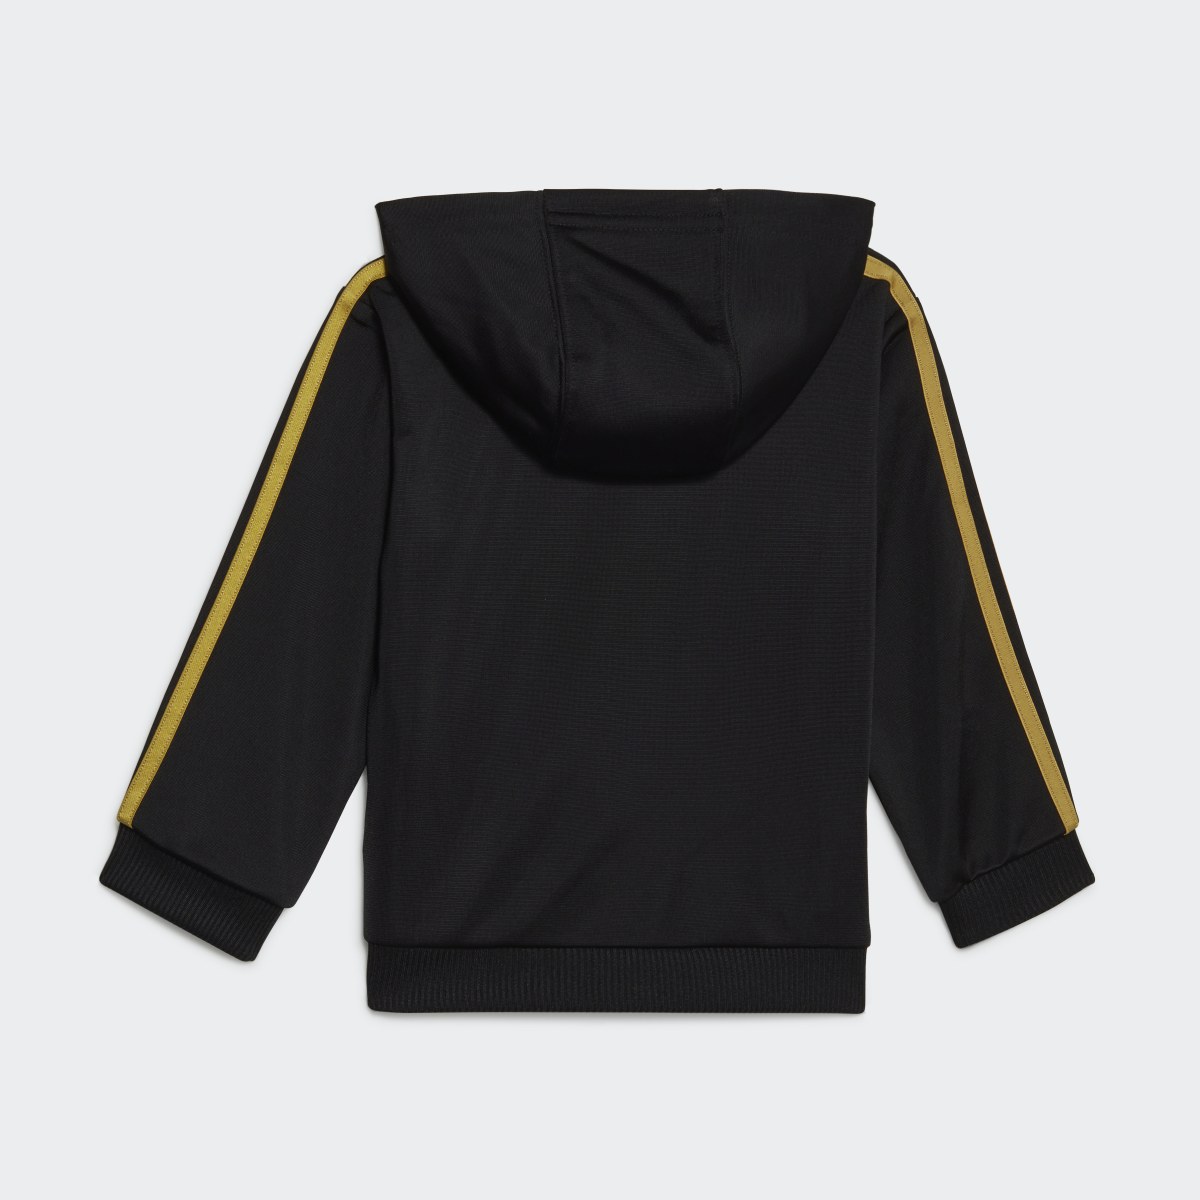 Adidas Essentials Shiny Hooded Track Suit. 4